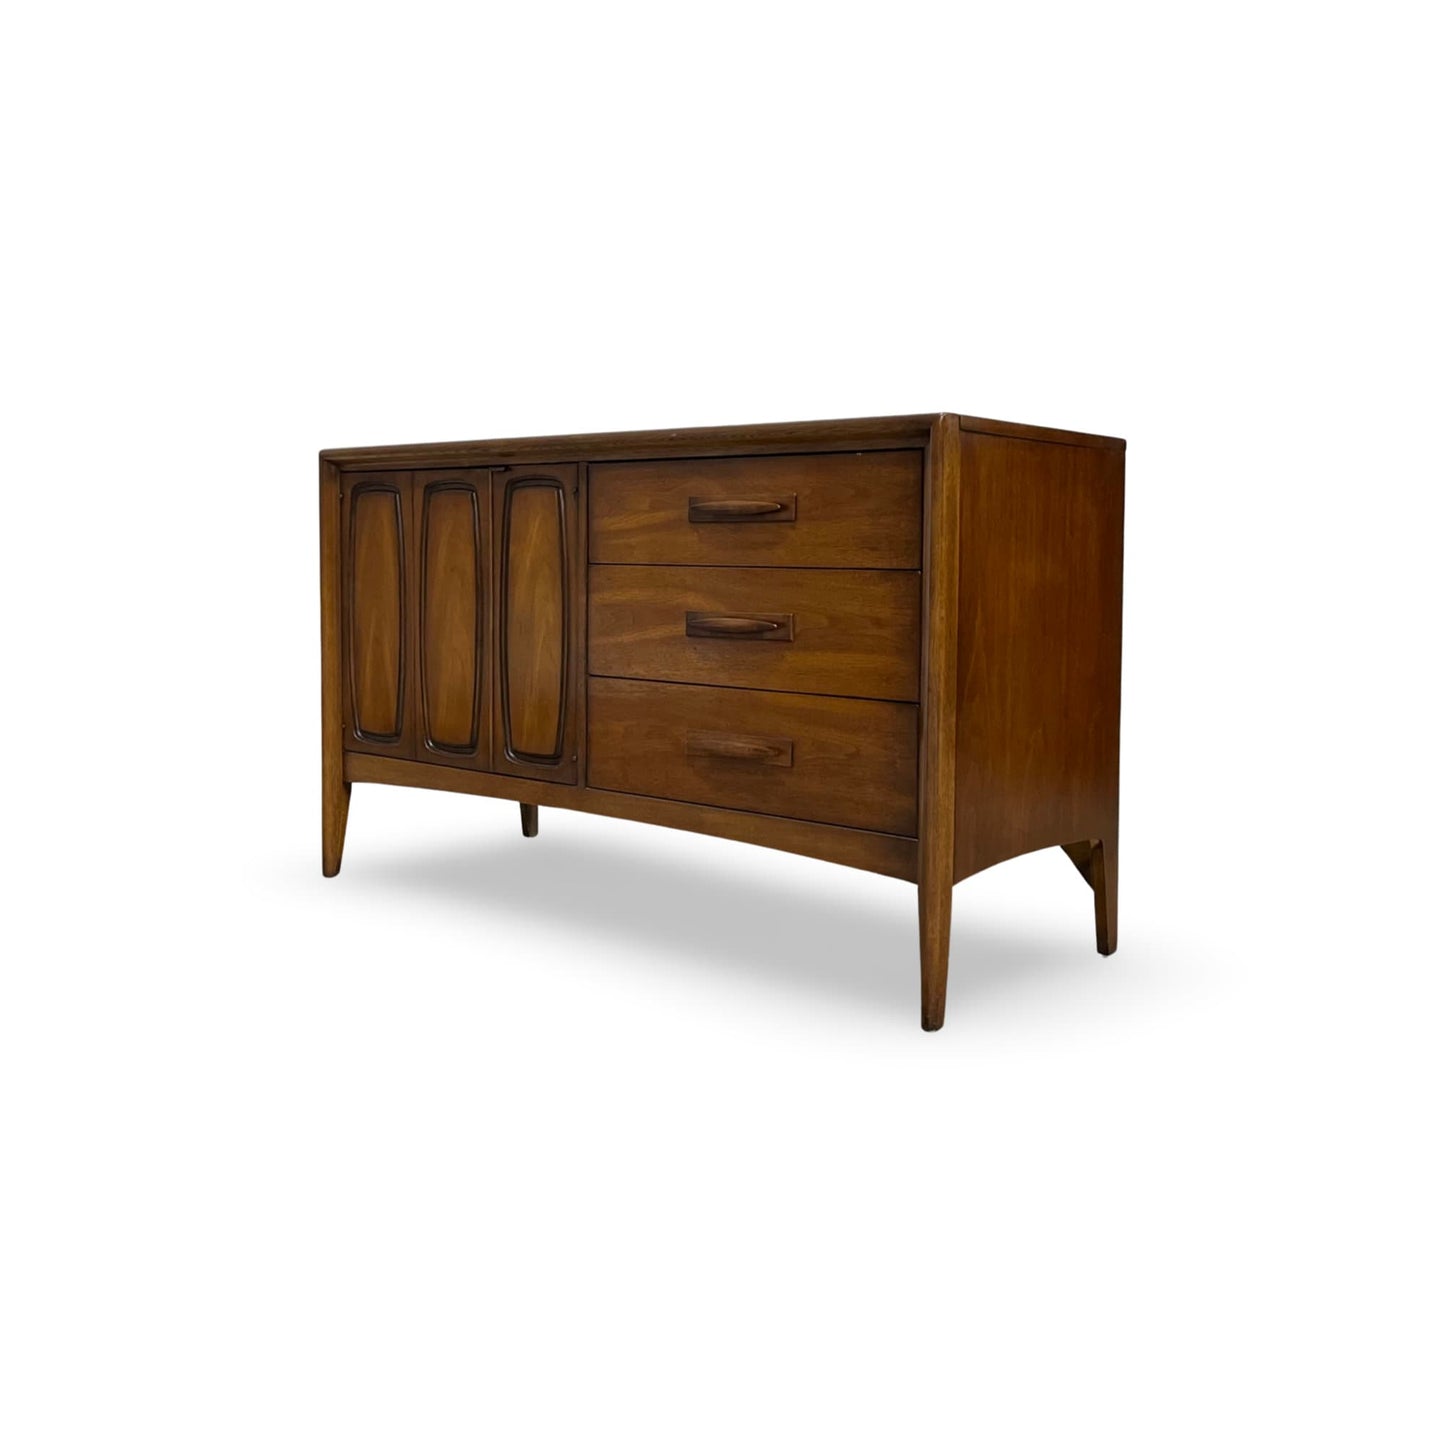 Broyhill Emphasis Mid Century Modern Sideboard Buffet - 1960s Vintage